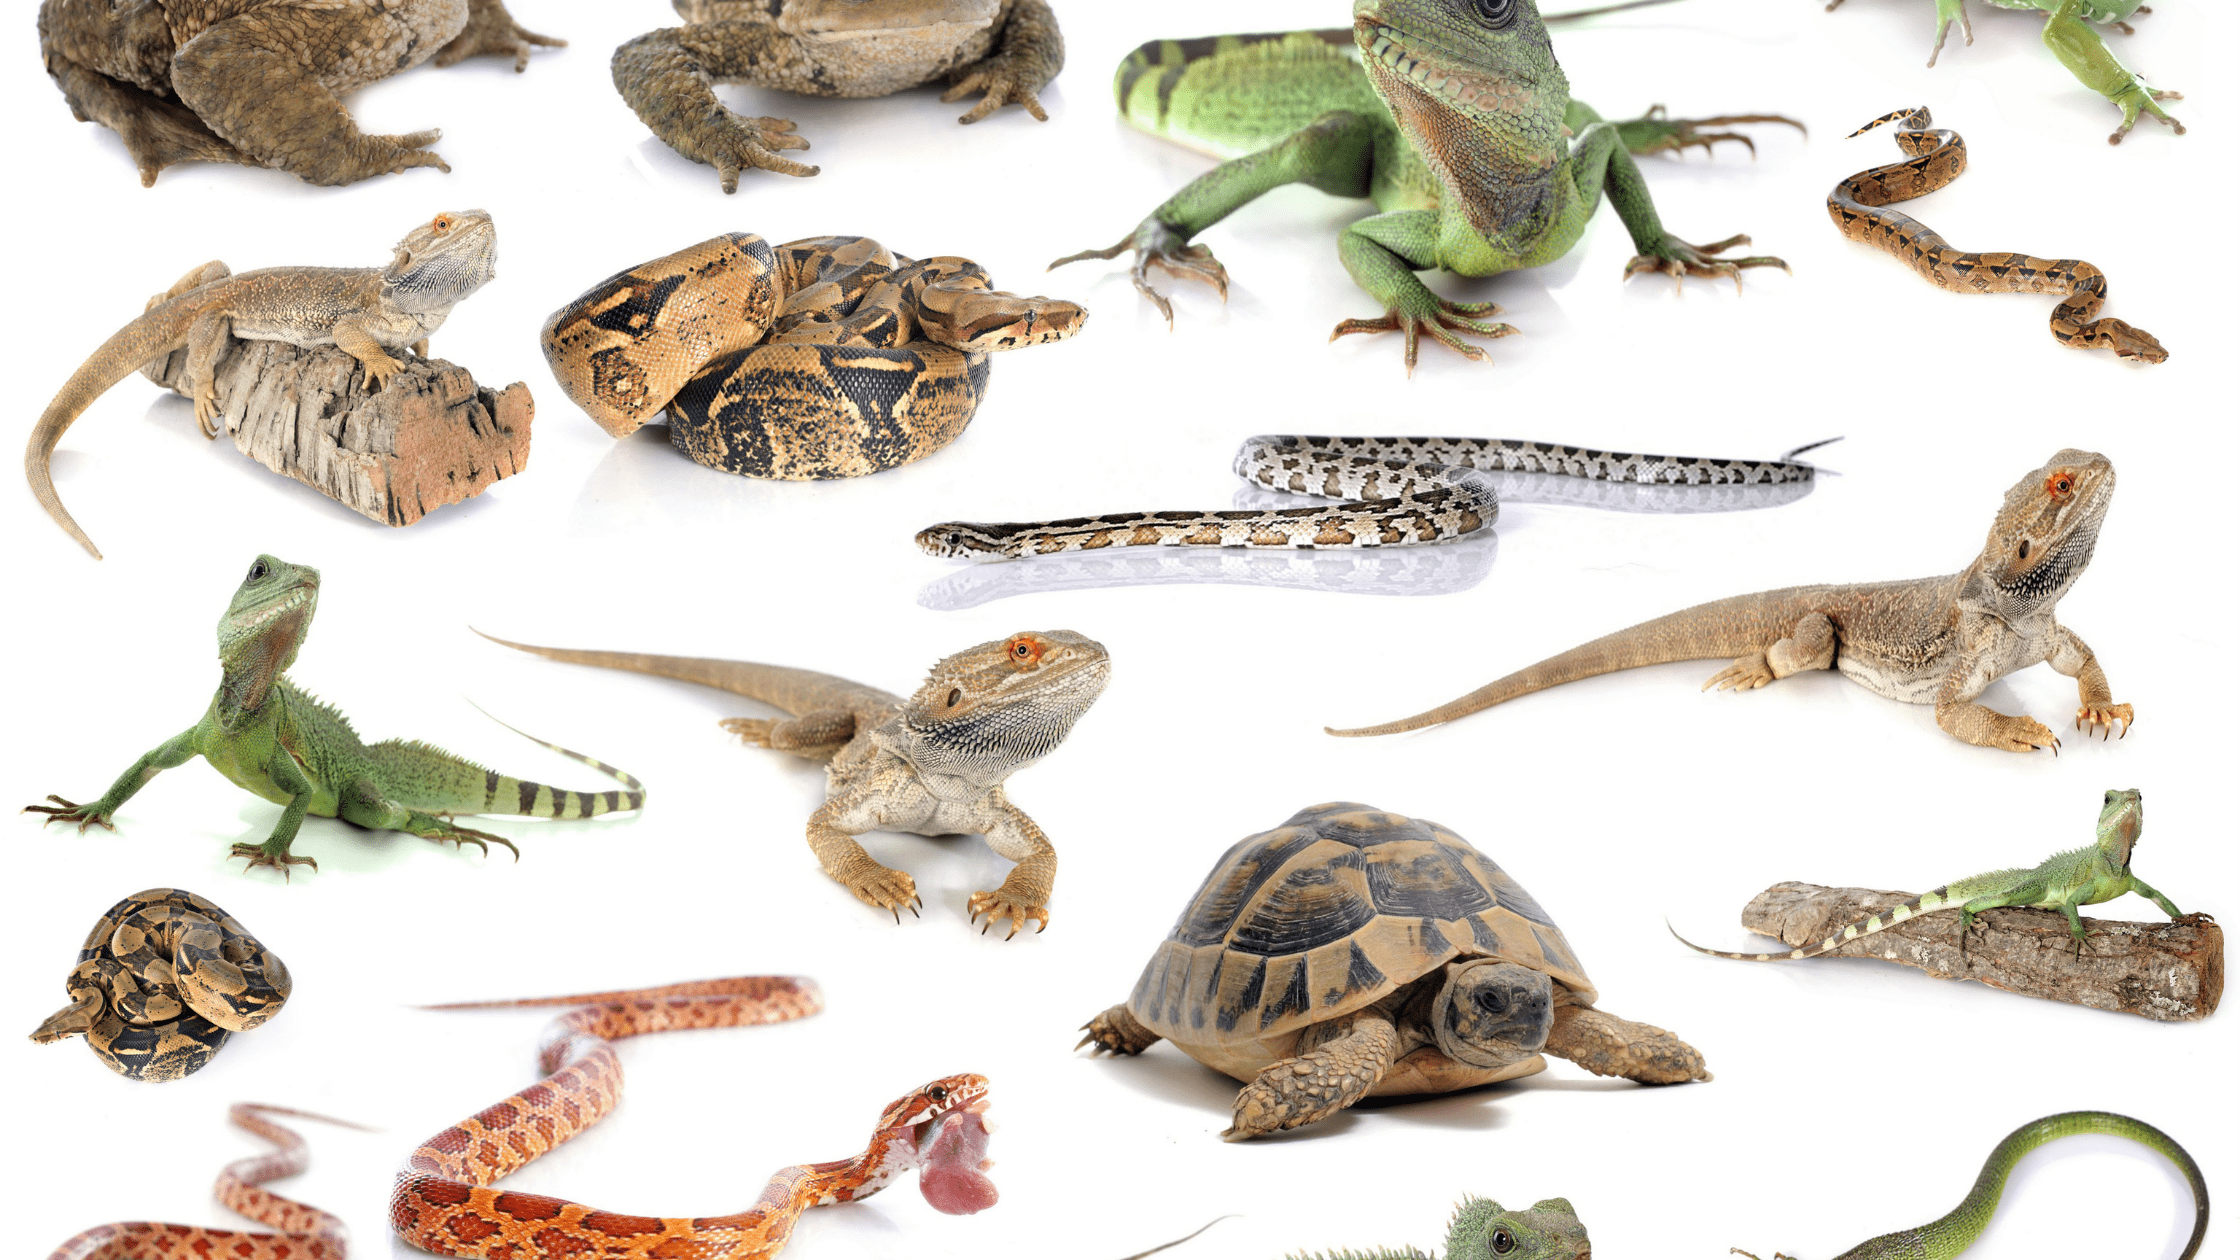 types of house pet lizards